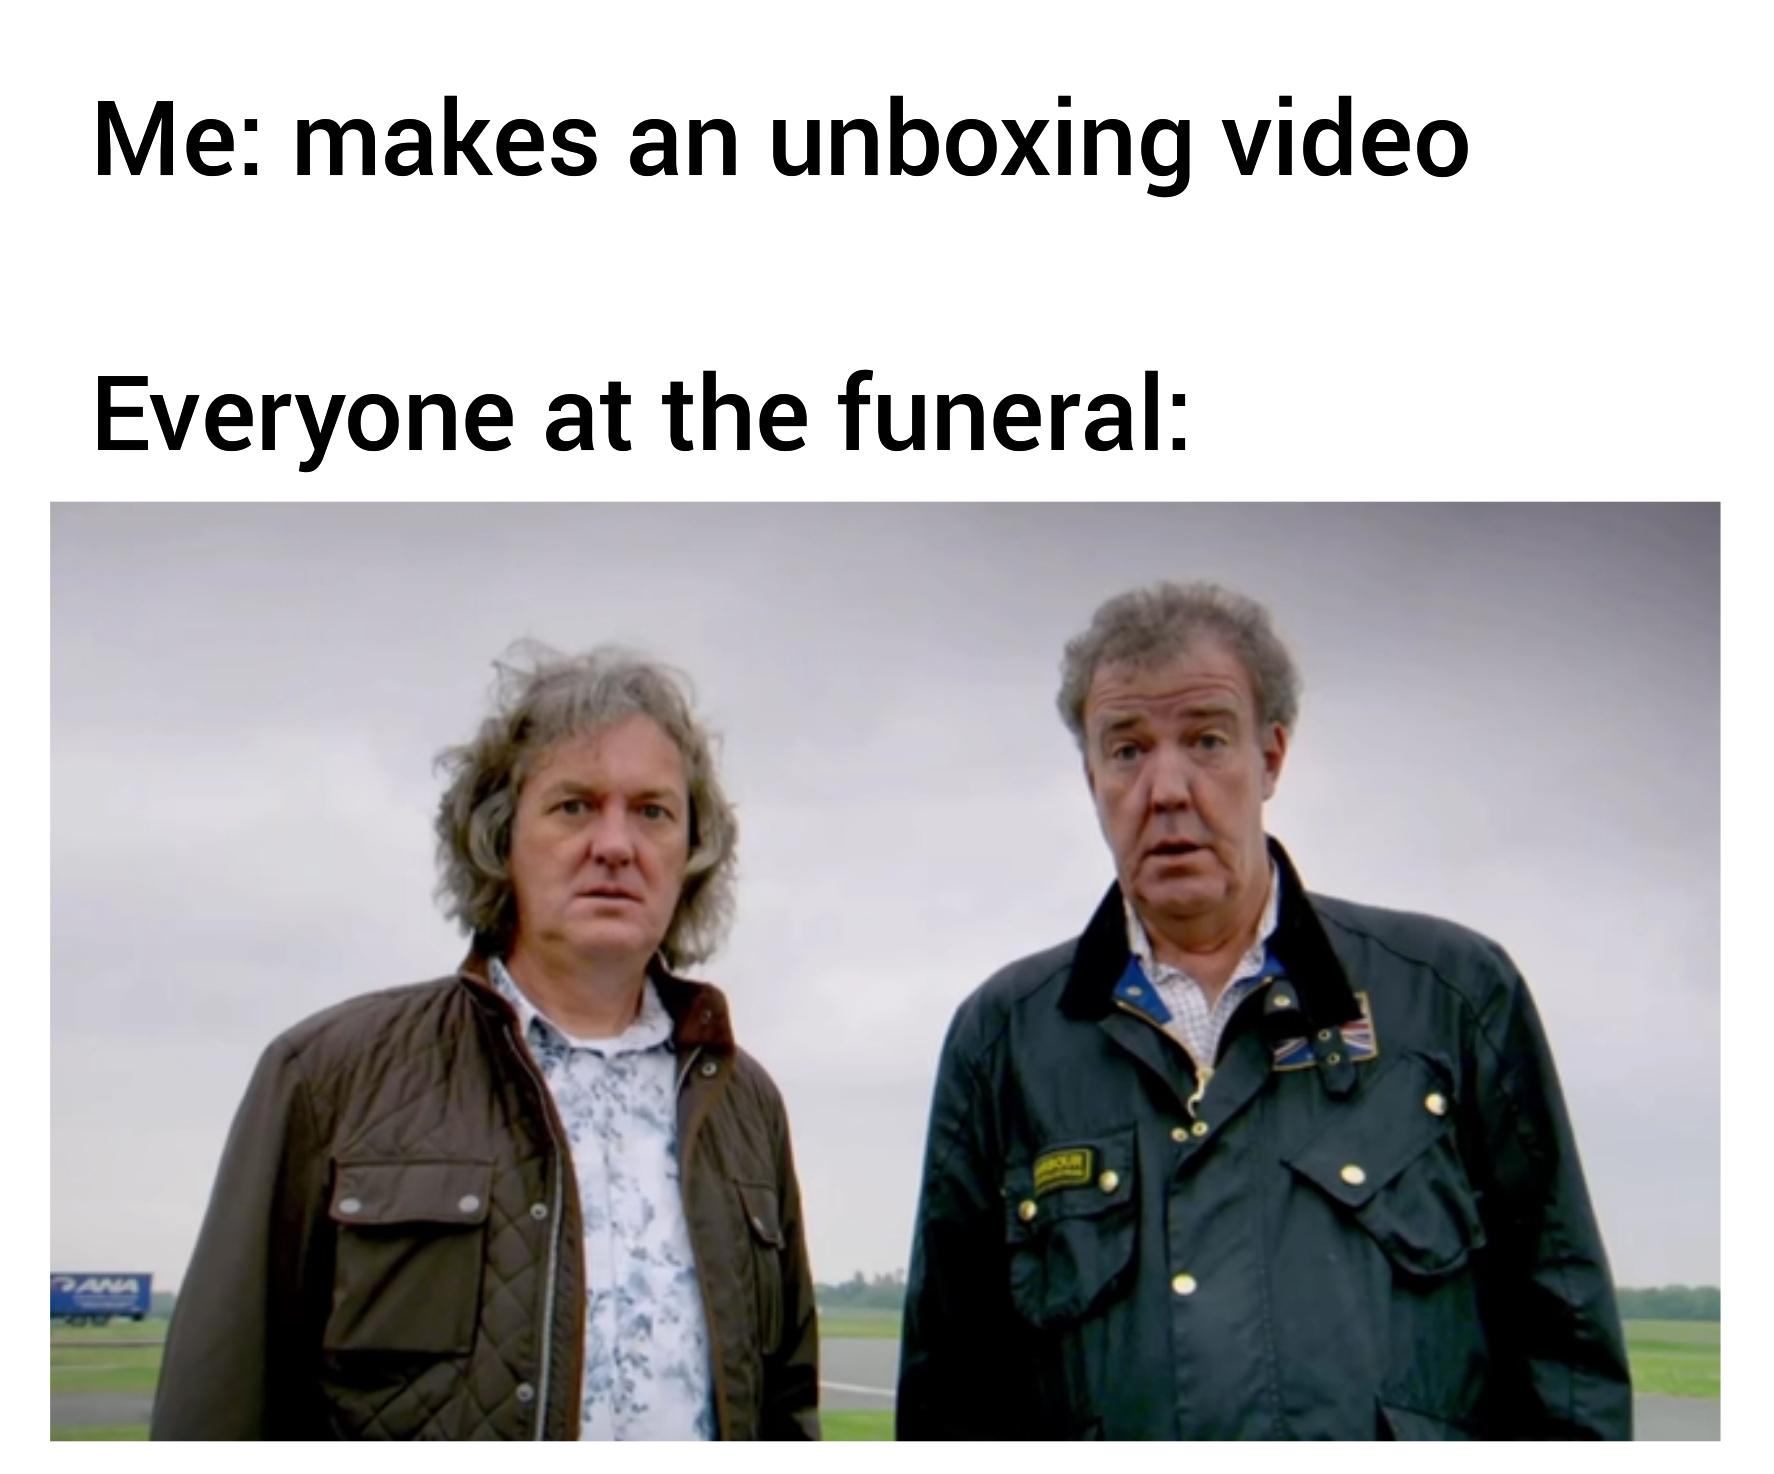 saudi drift memes - Me makes an unboxing video Everyone at the funeral